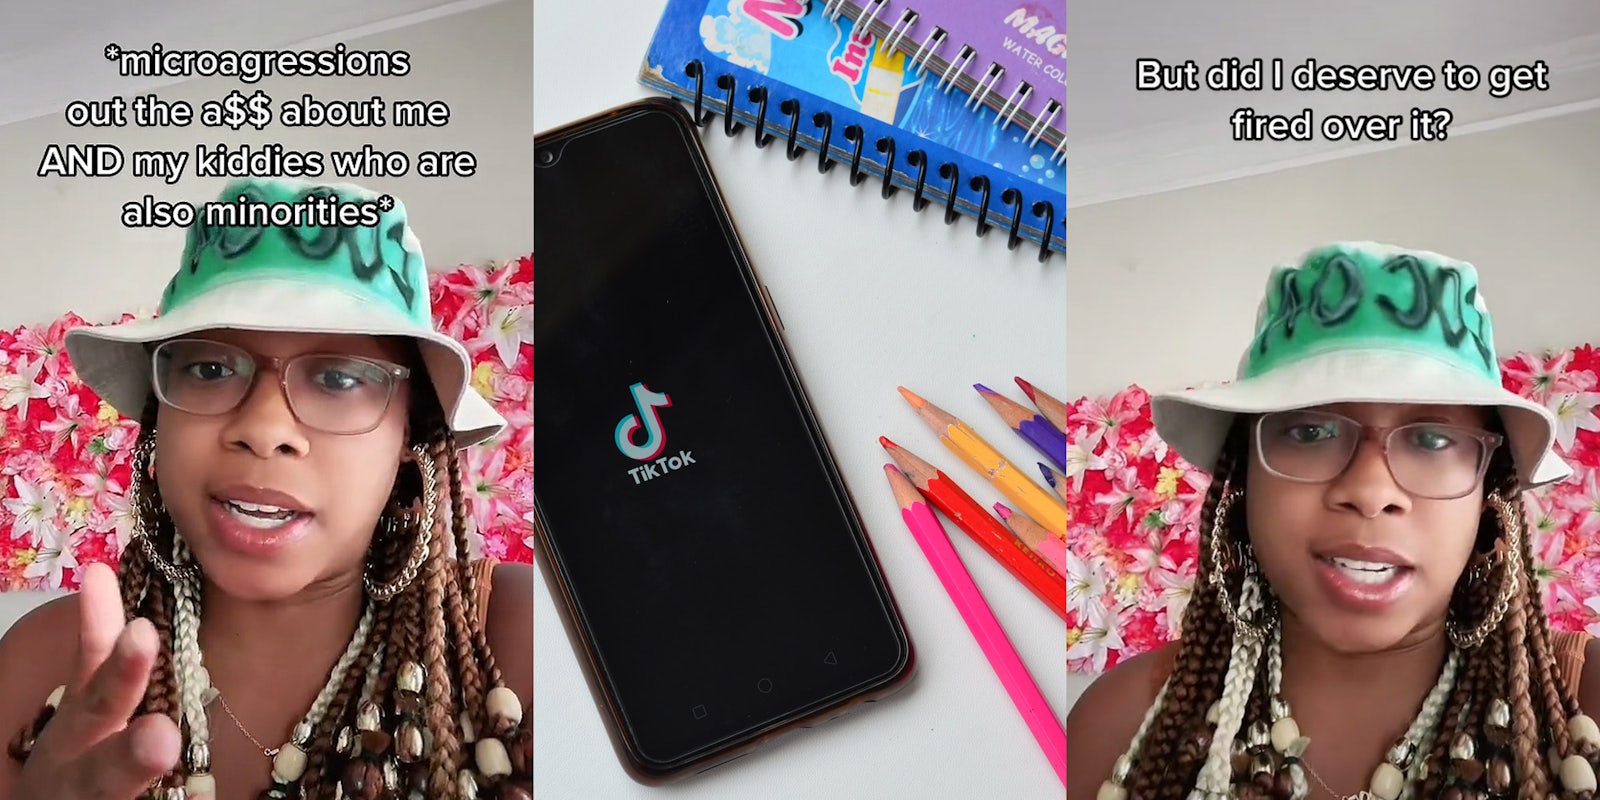 woman speaking hand out caption '*microaggressions out the a$$ about me AND my kiddies who are also minorities*' (l) TikTok app open on phone with colored pencils and notebooks on table (c) woman speaking caption 'But did I deserve to get fired over it?' (r)